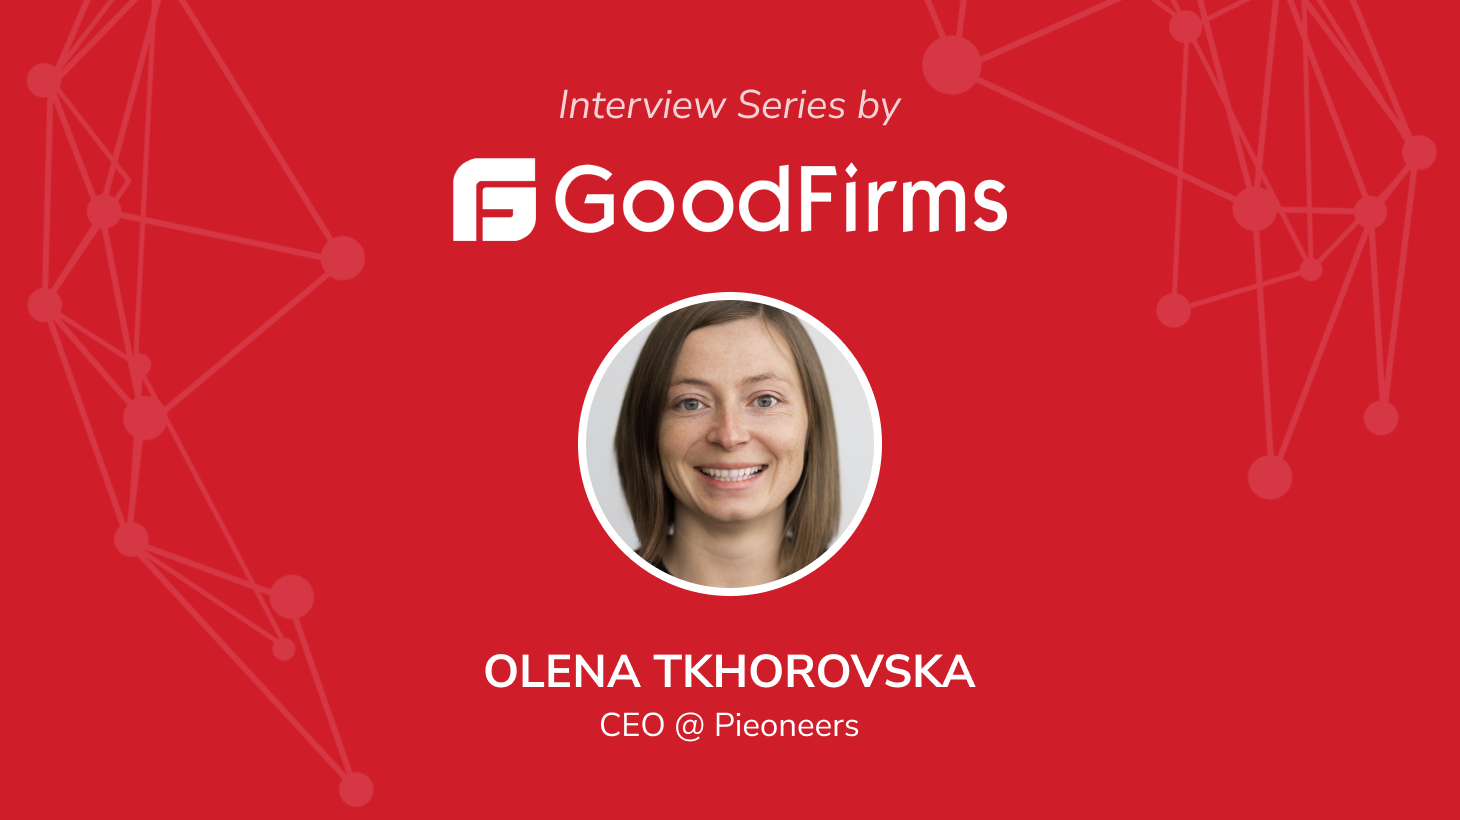 Olena's interview by GoodFirms